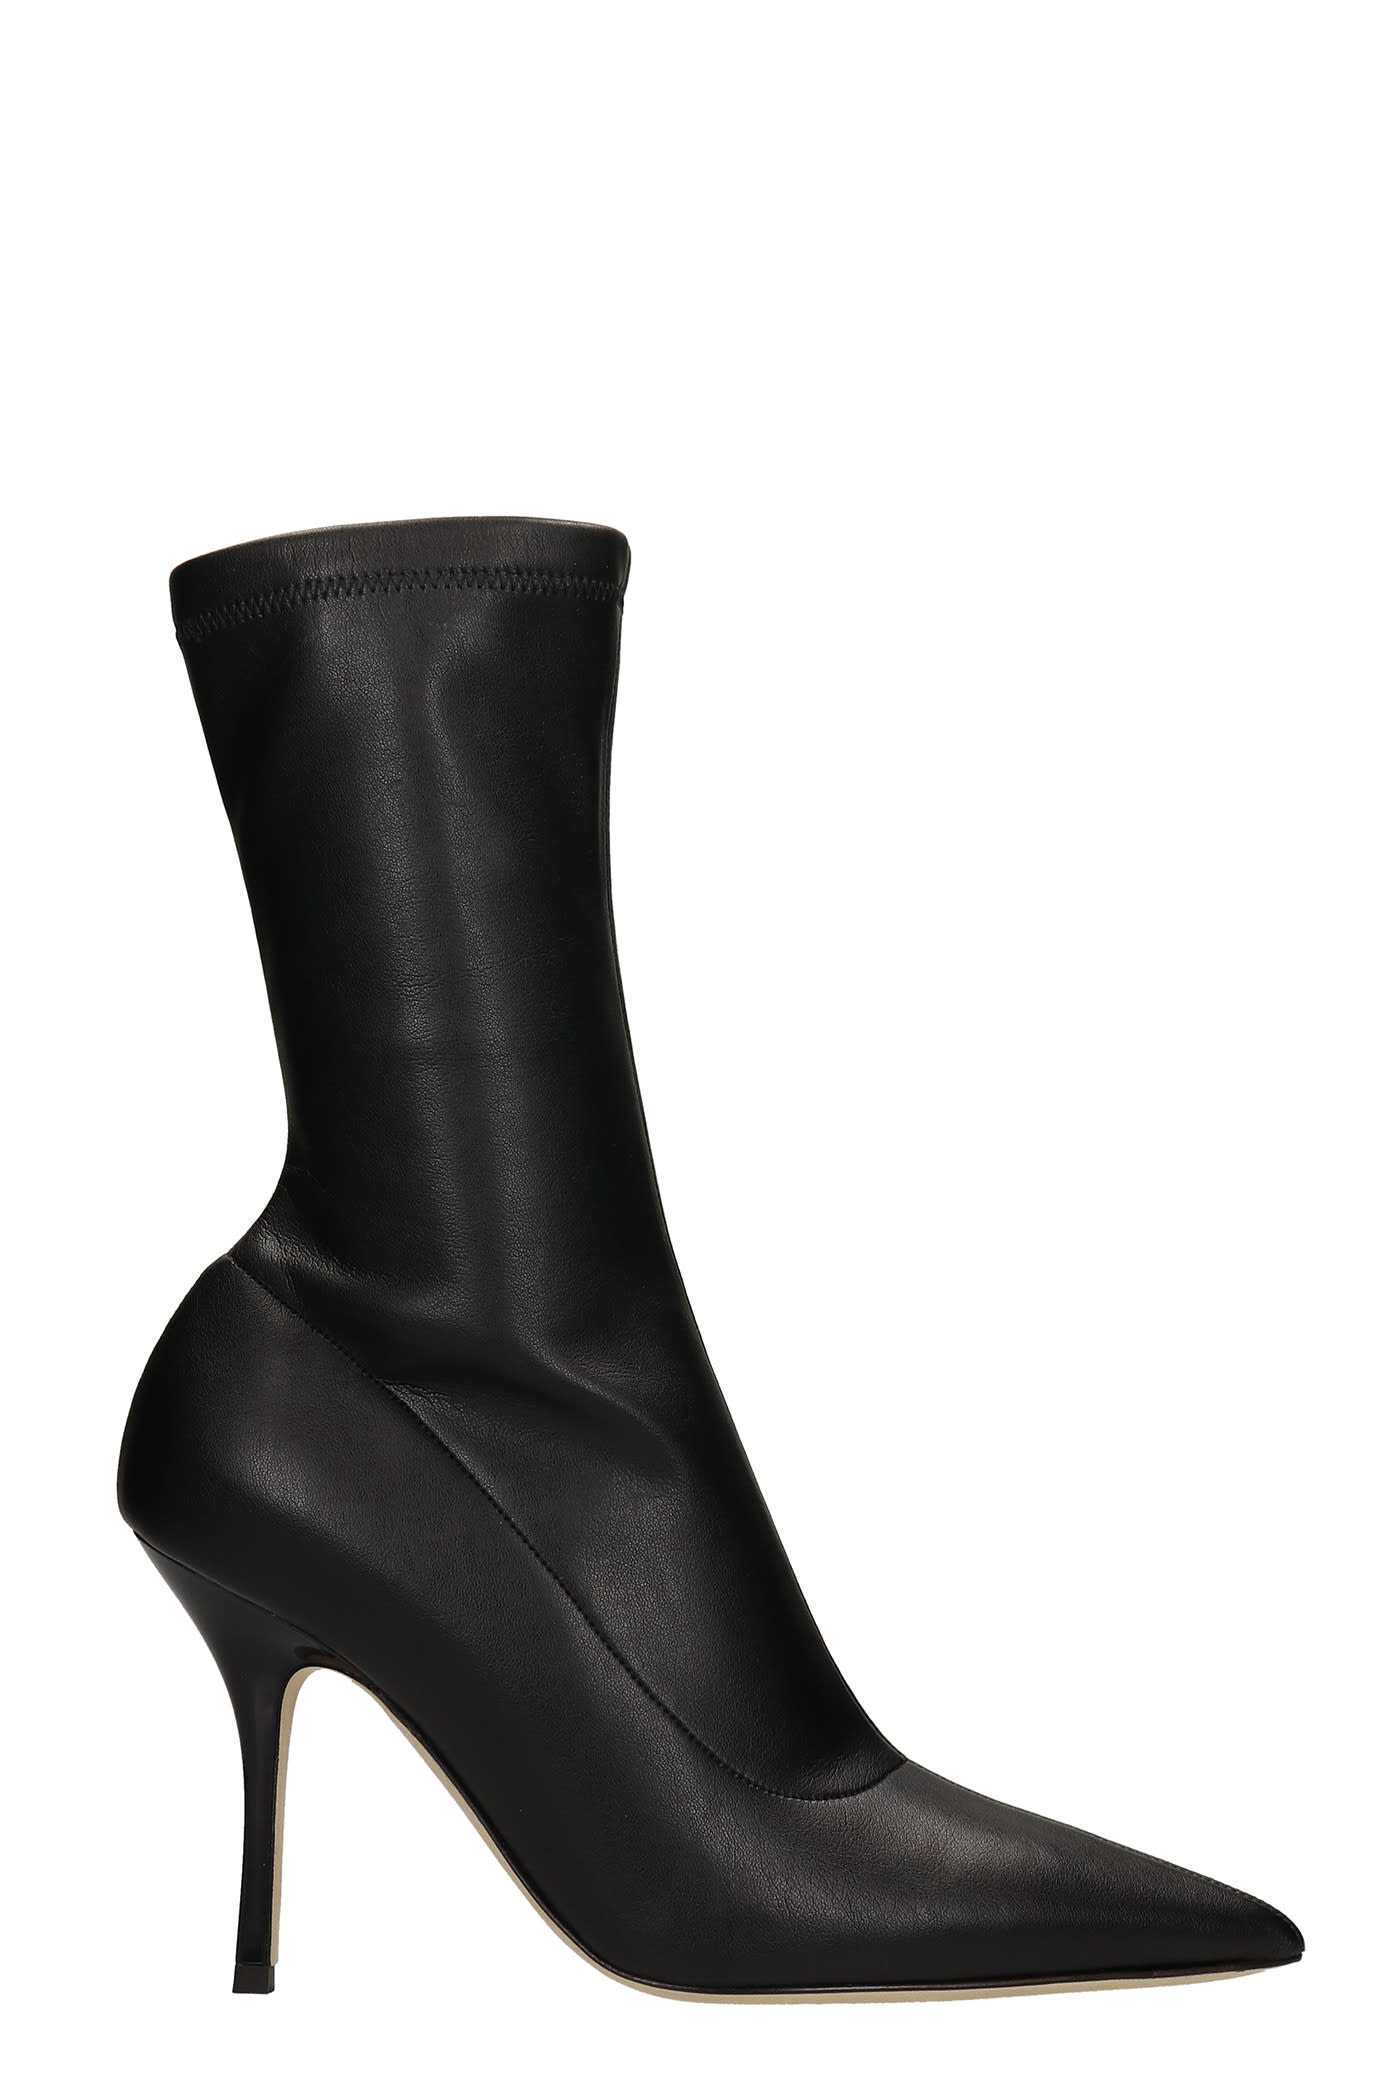 Paris Texas Mama High Heels Ankle Boots In Black Leather